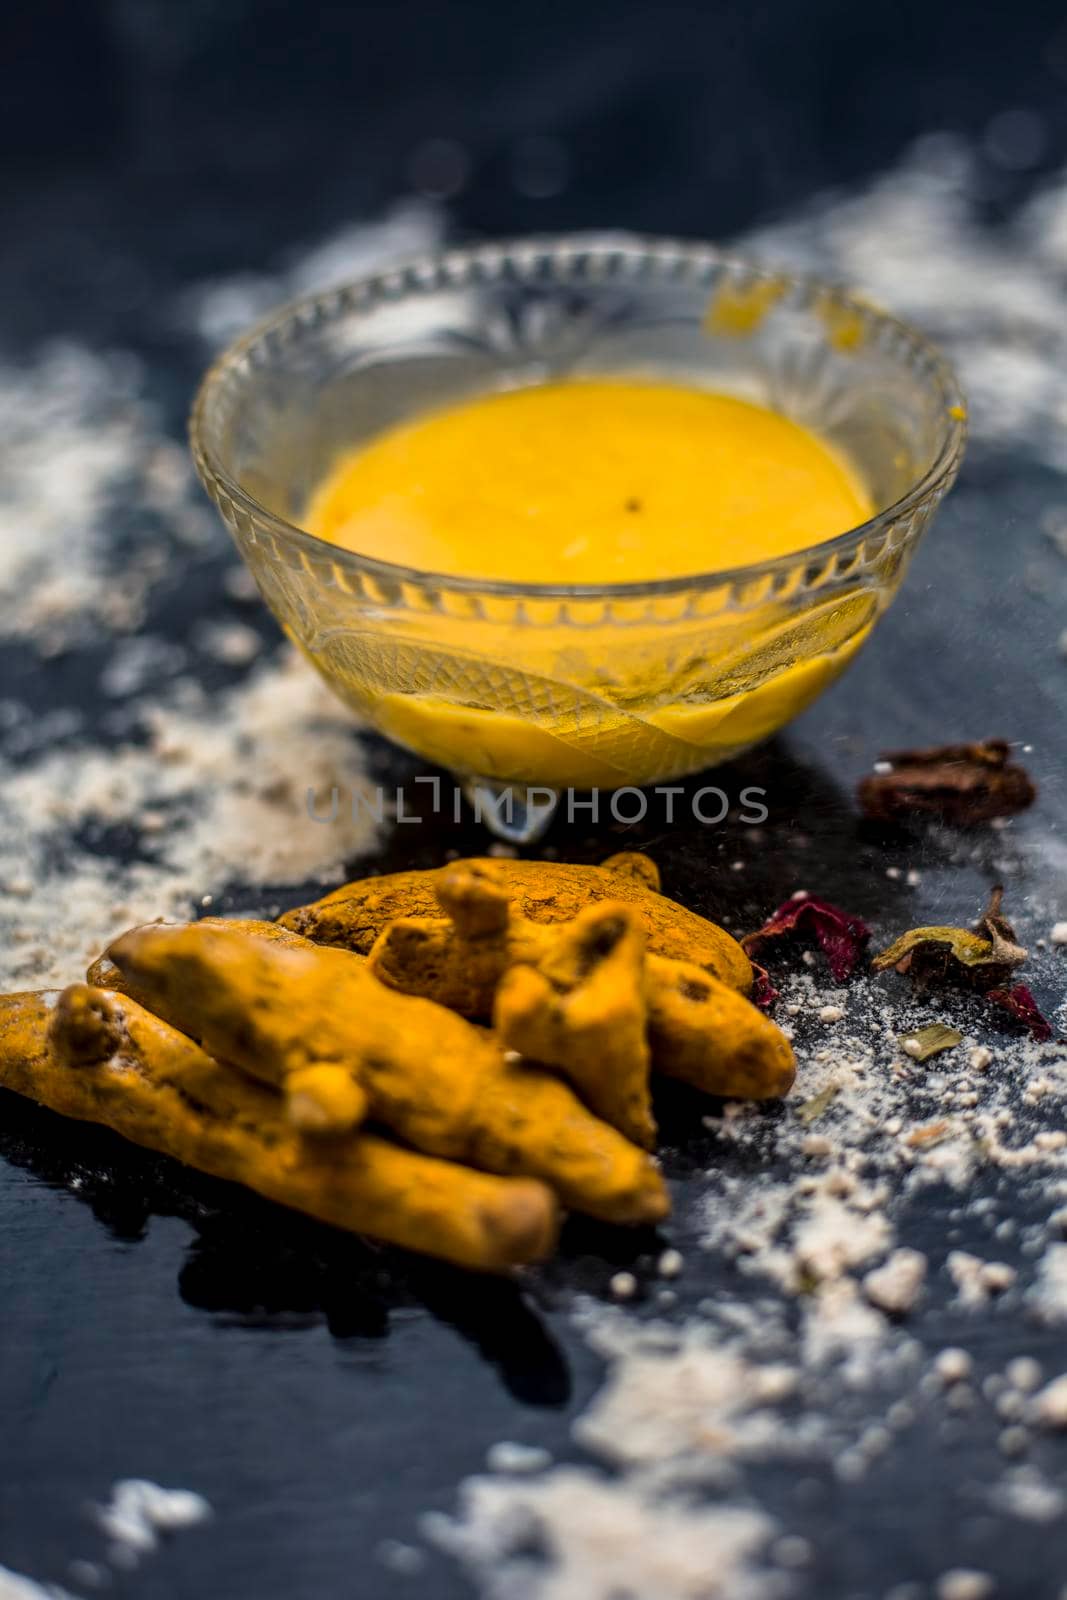 Gram flour or chickpea flour well mixed with turmeric using rose water in a glass bowl and making gram flour face mask for maintaining the pH of the skin. by mirzamlk